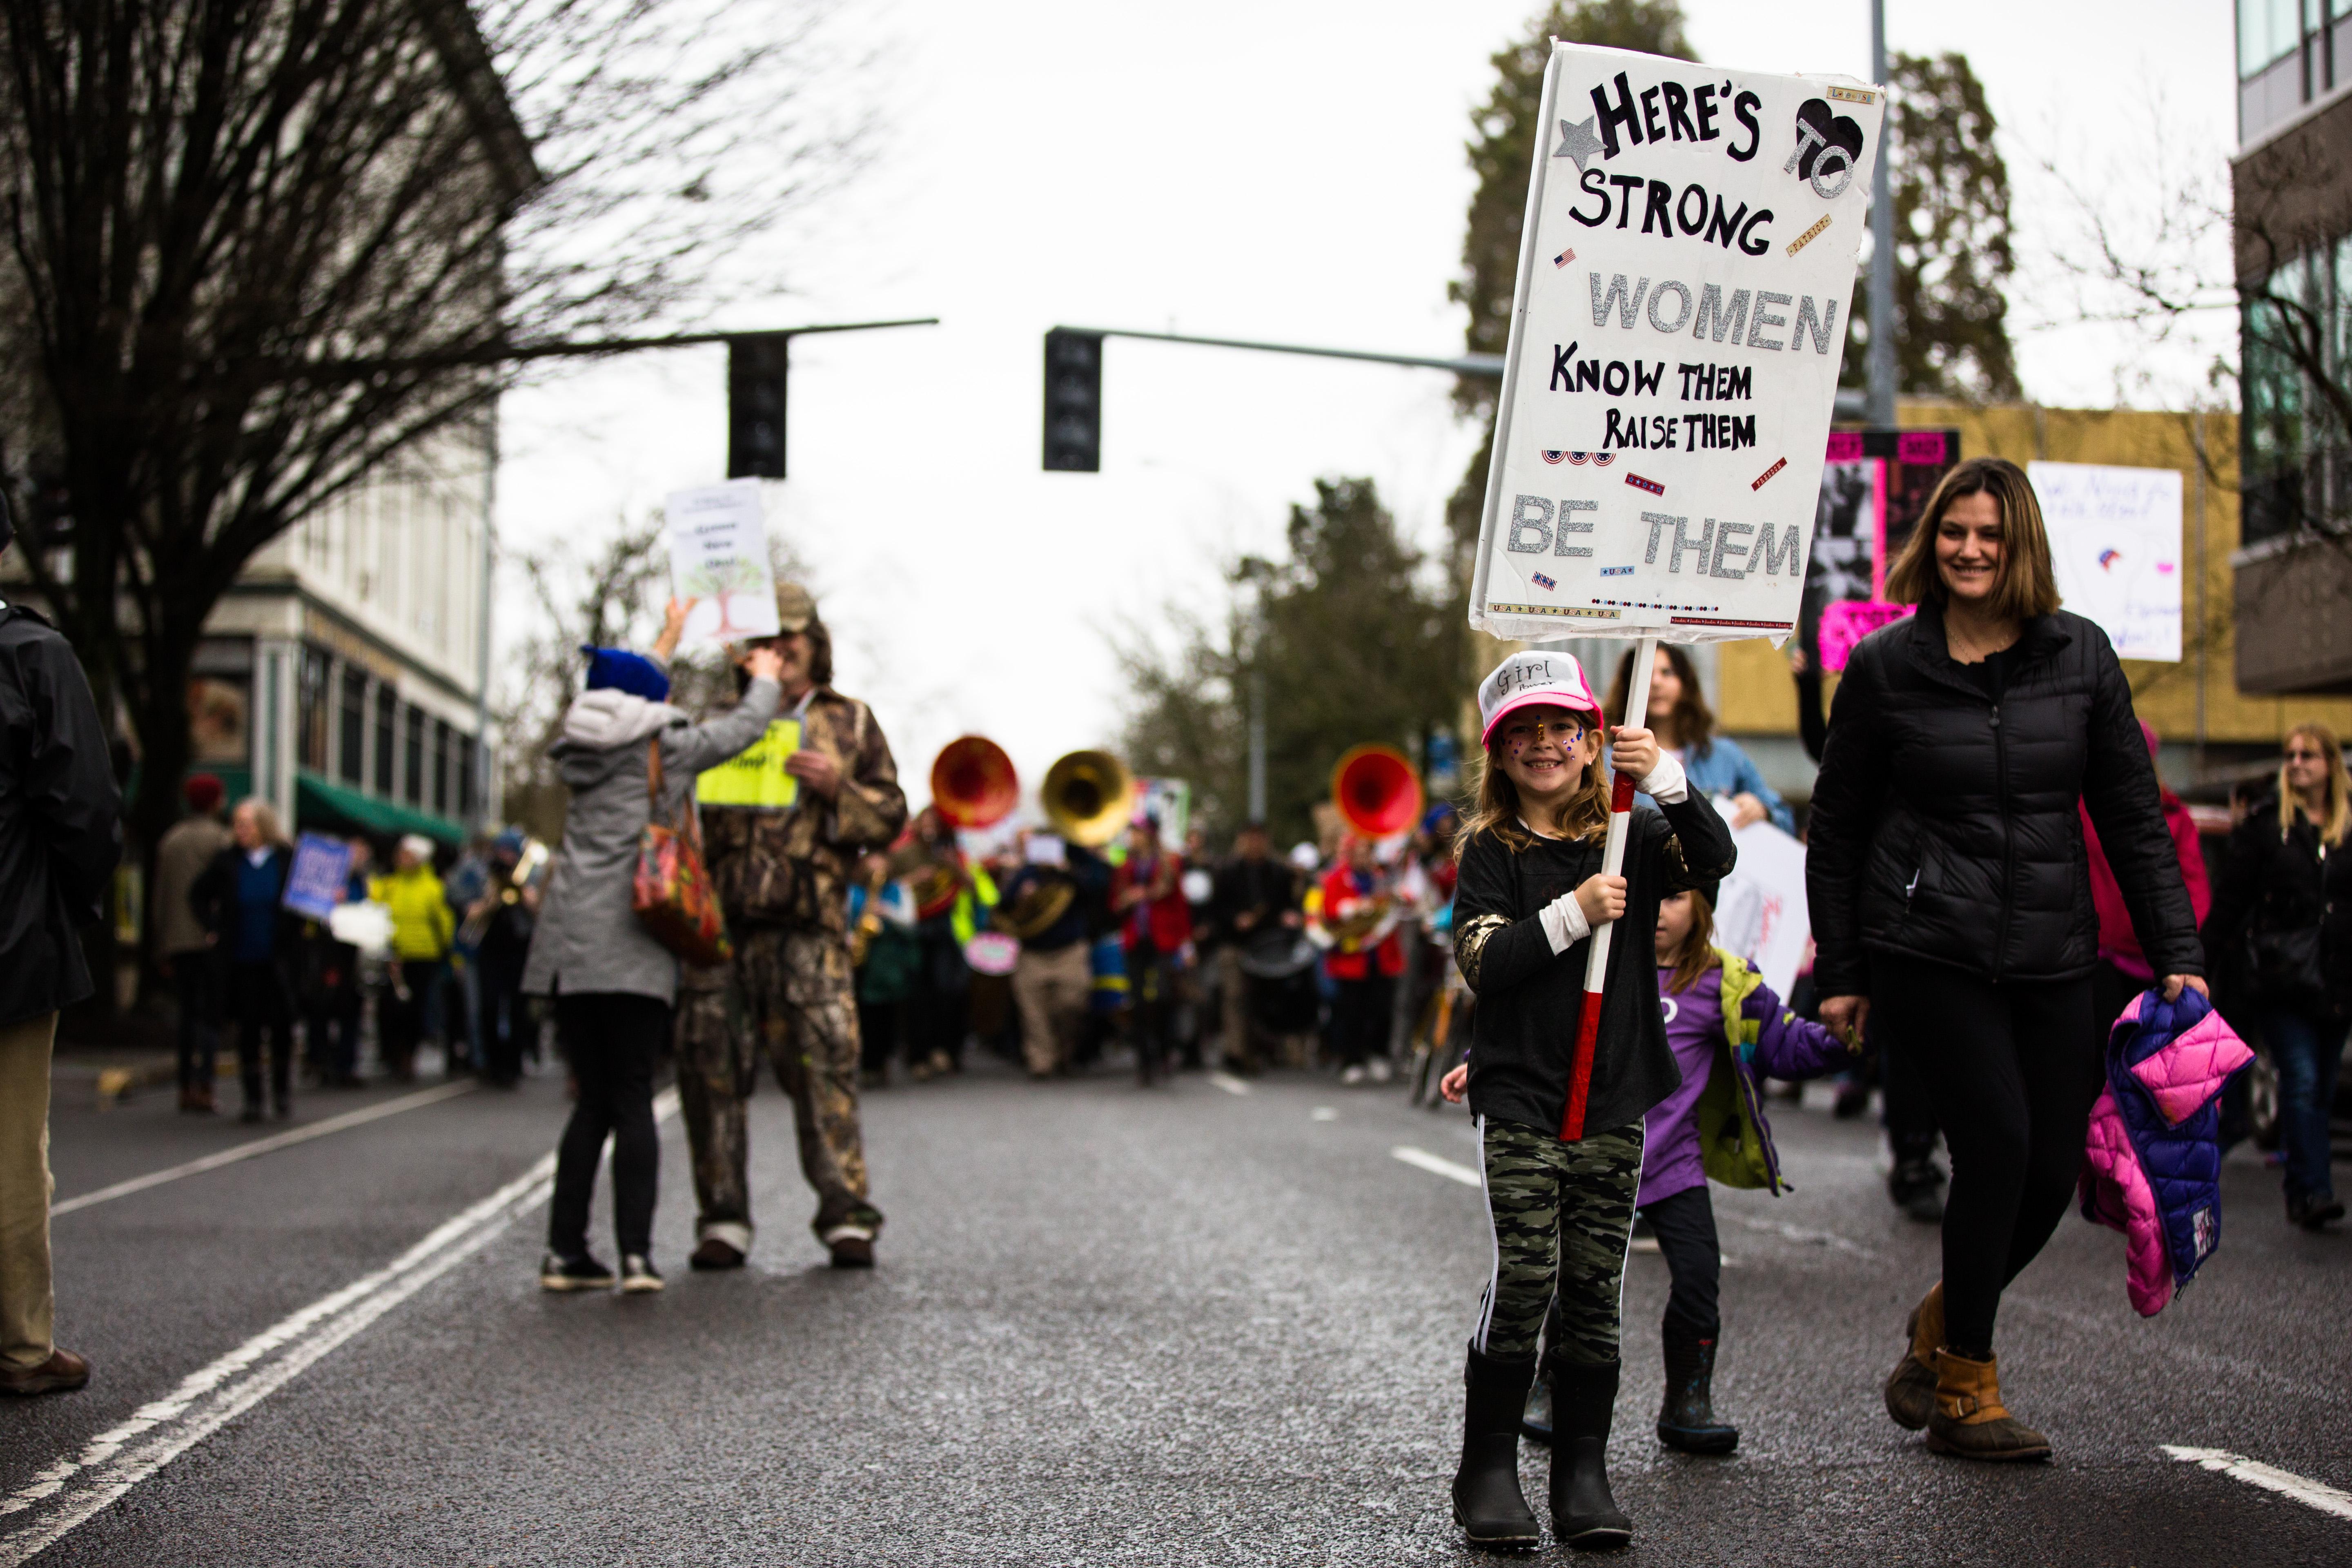 The 2019 Women's March moves through the streets of Eugene, Ore., Saturday, Jan. 19, 2019.